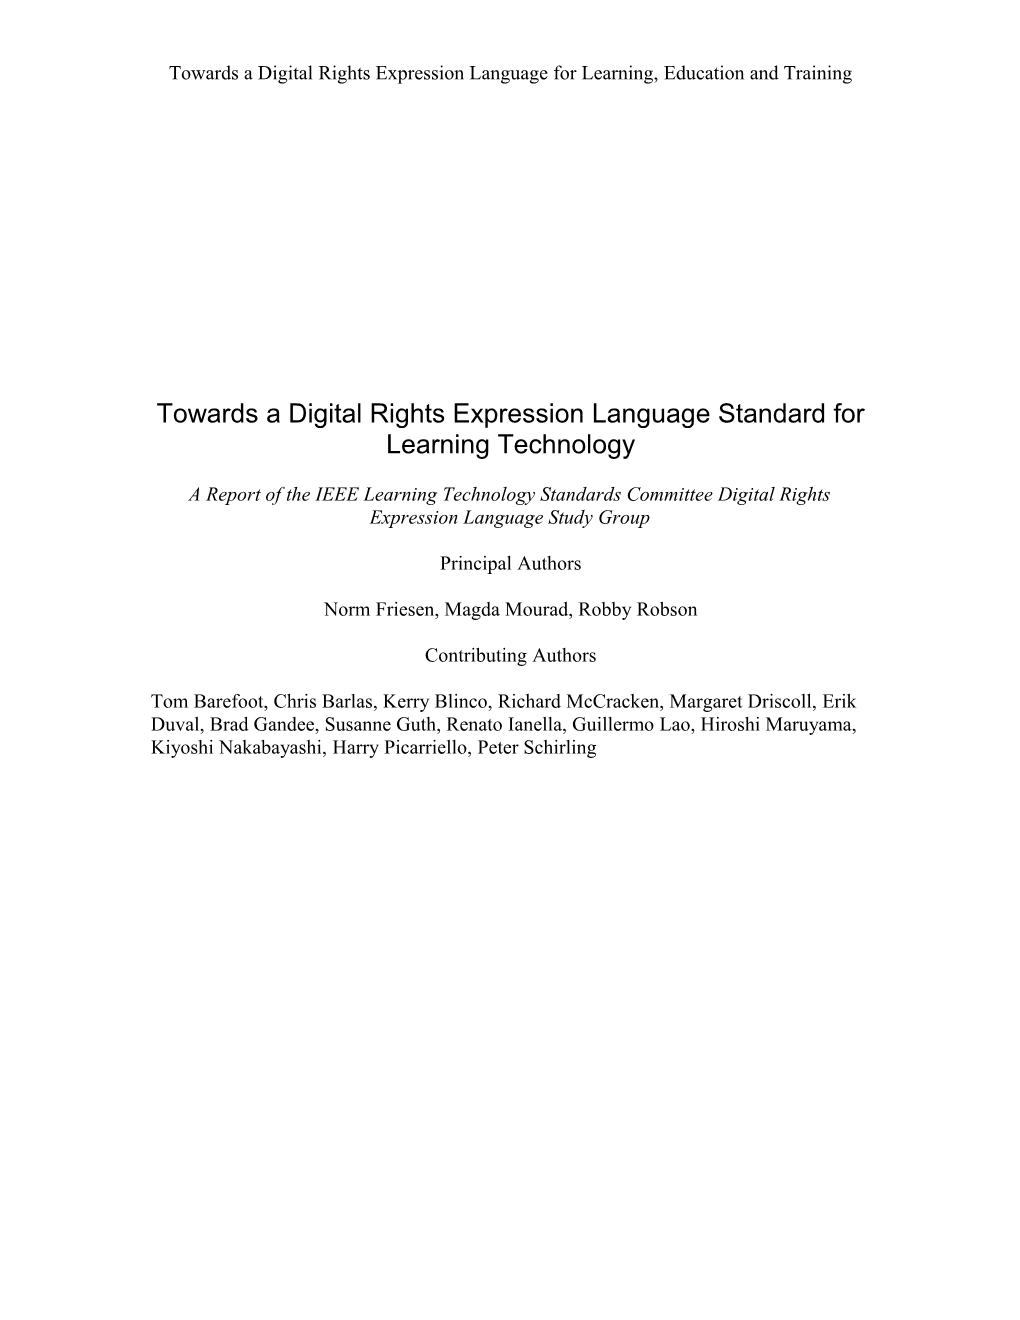 Towards a Digital Rights Expression Language Standard for Learning Technology